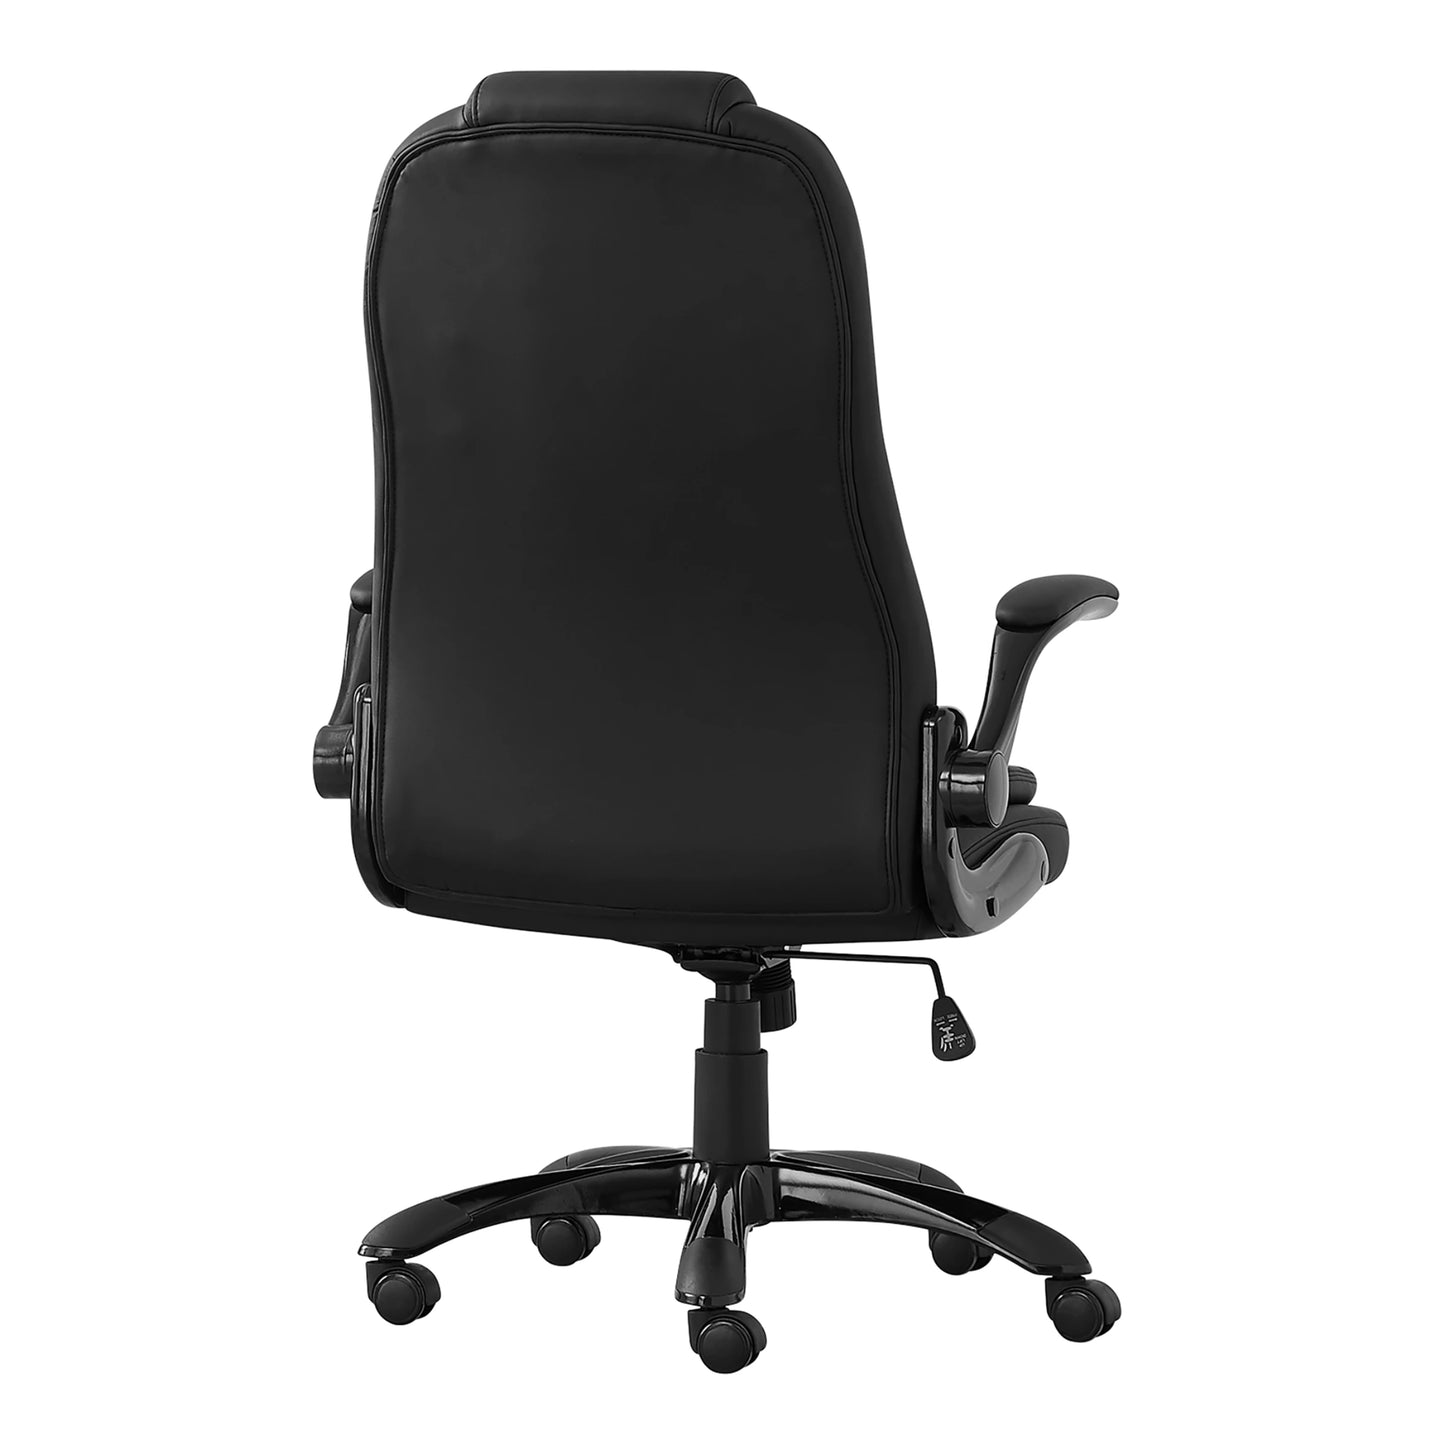 Black Office Chair - I 7277